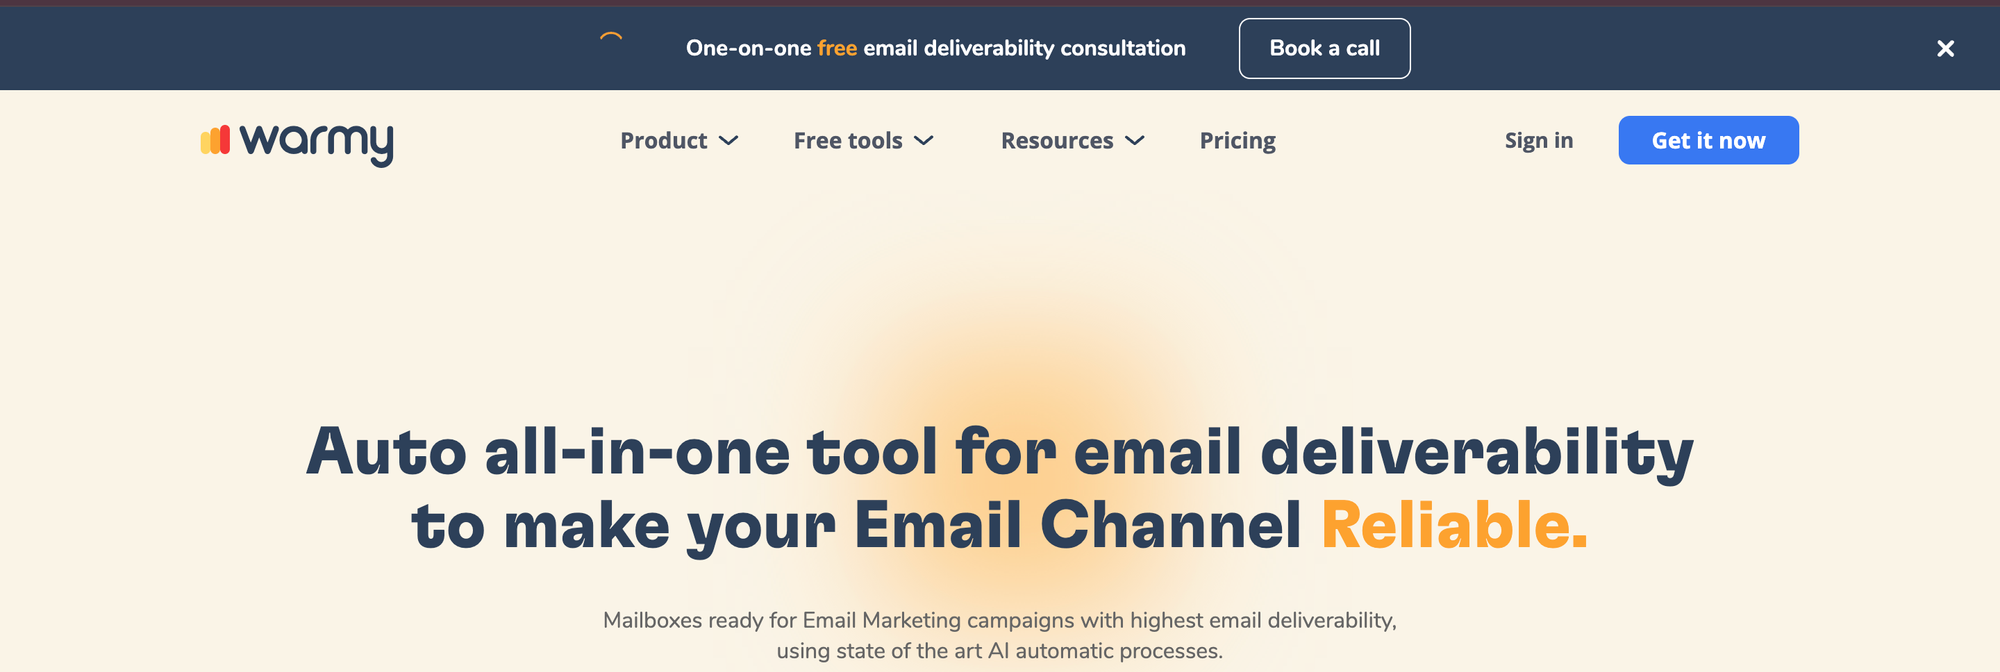 Warmy - Email Deliverability Tool